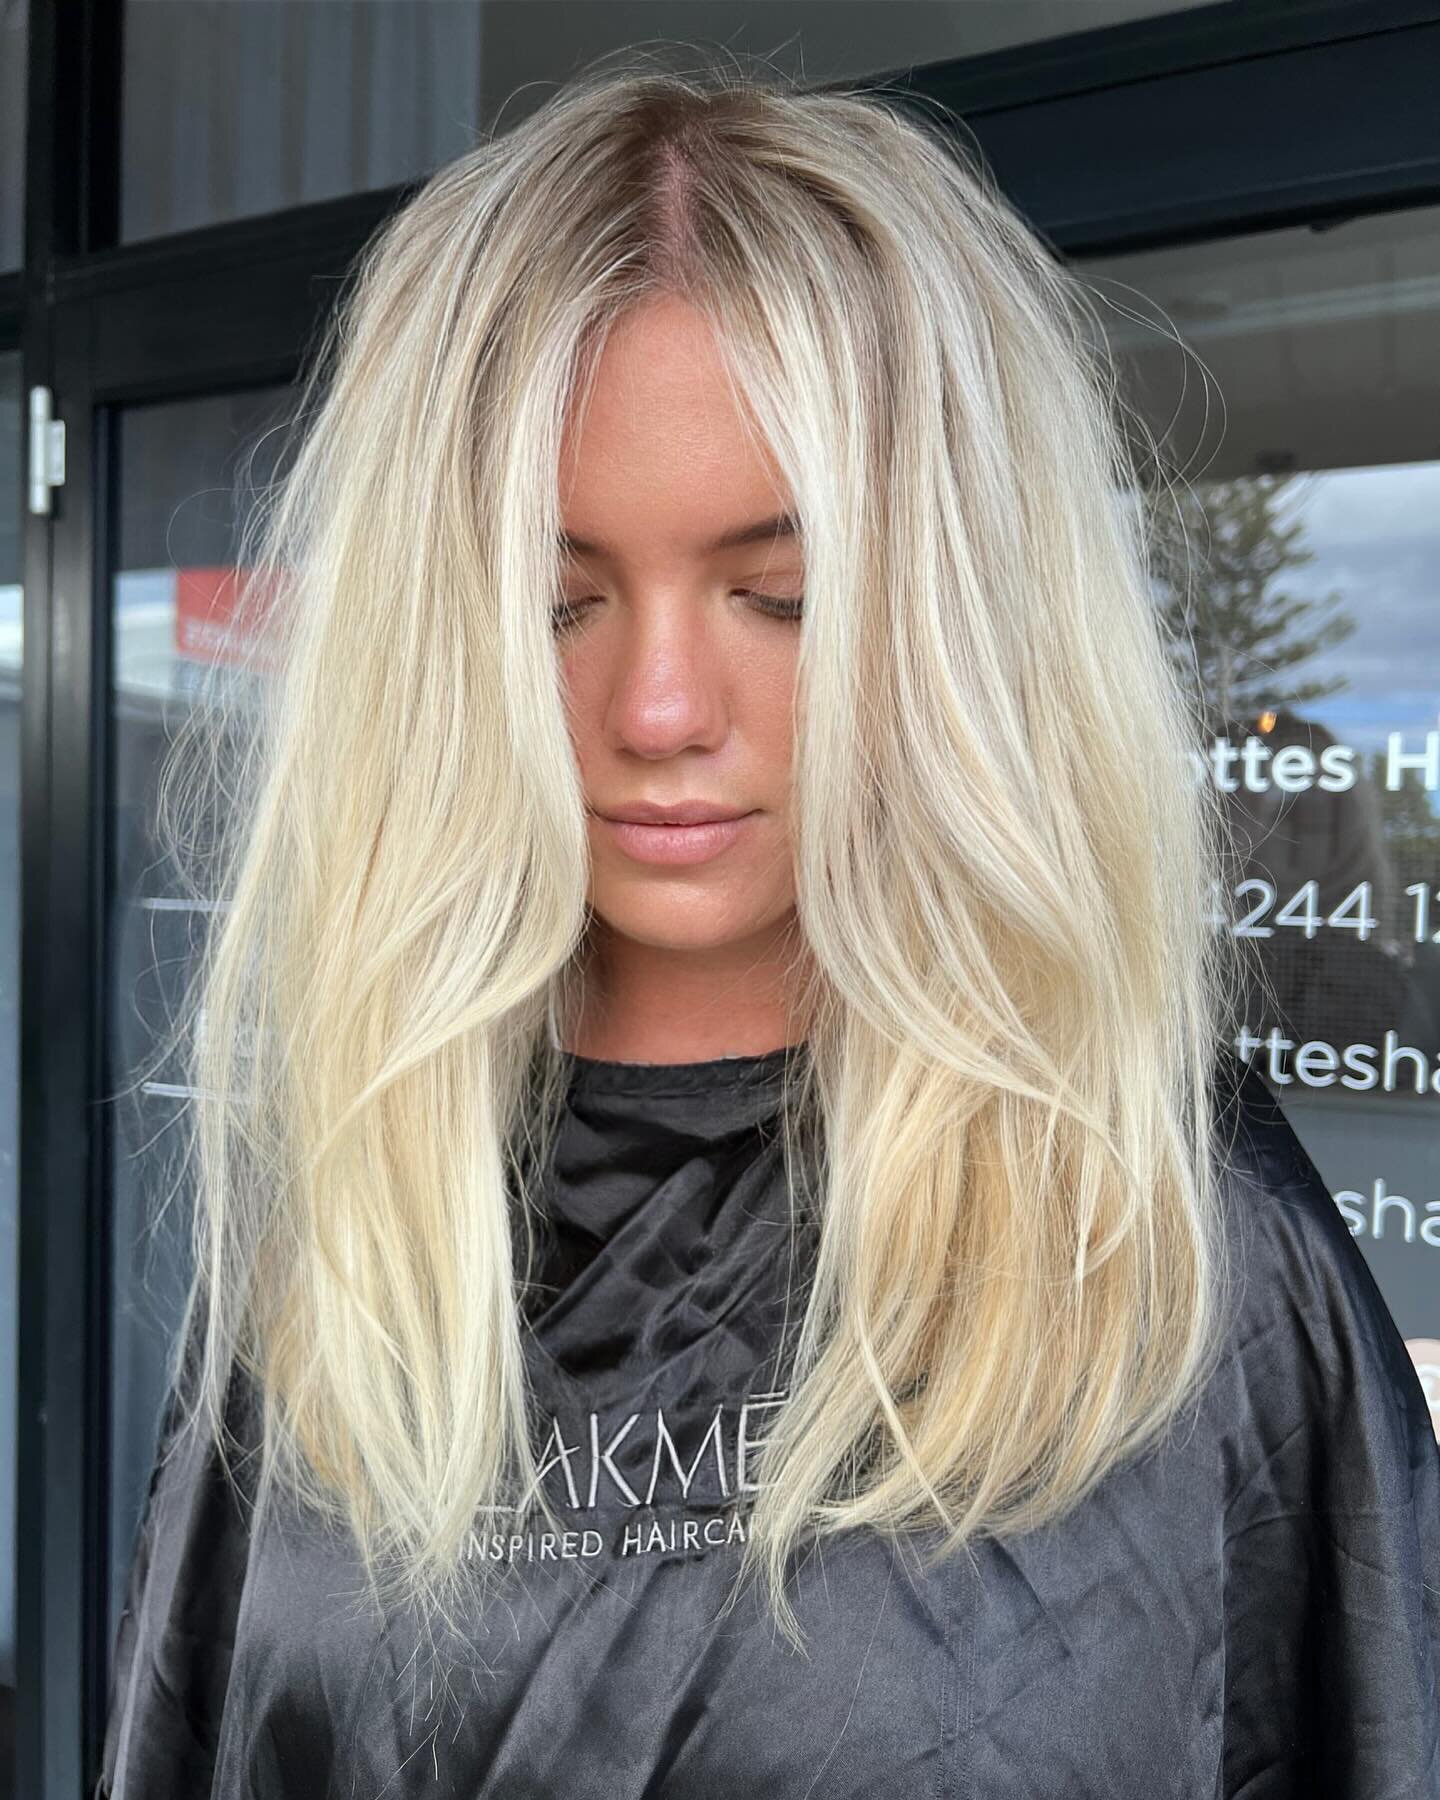 Transforming blonde foils into a radiant balayage masterpiece ✨ Hair magic at its finest! 
.
.
.
#BlondeTransformation #BalayageBeauty
@lakmecolour #lakmecolour @haircaregroup #haircaregroup @foilqueenfoils #foilqueenfoils @olaplexau #olaplexau @olap